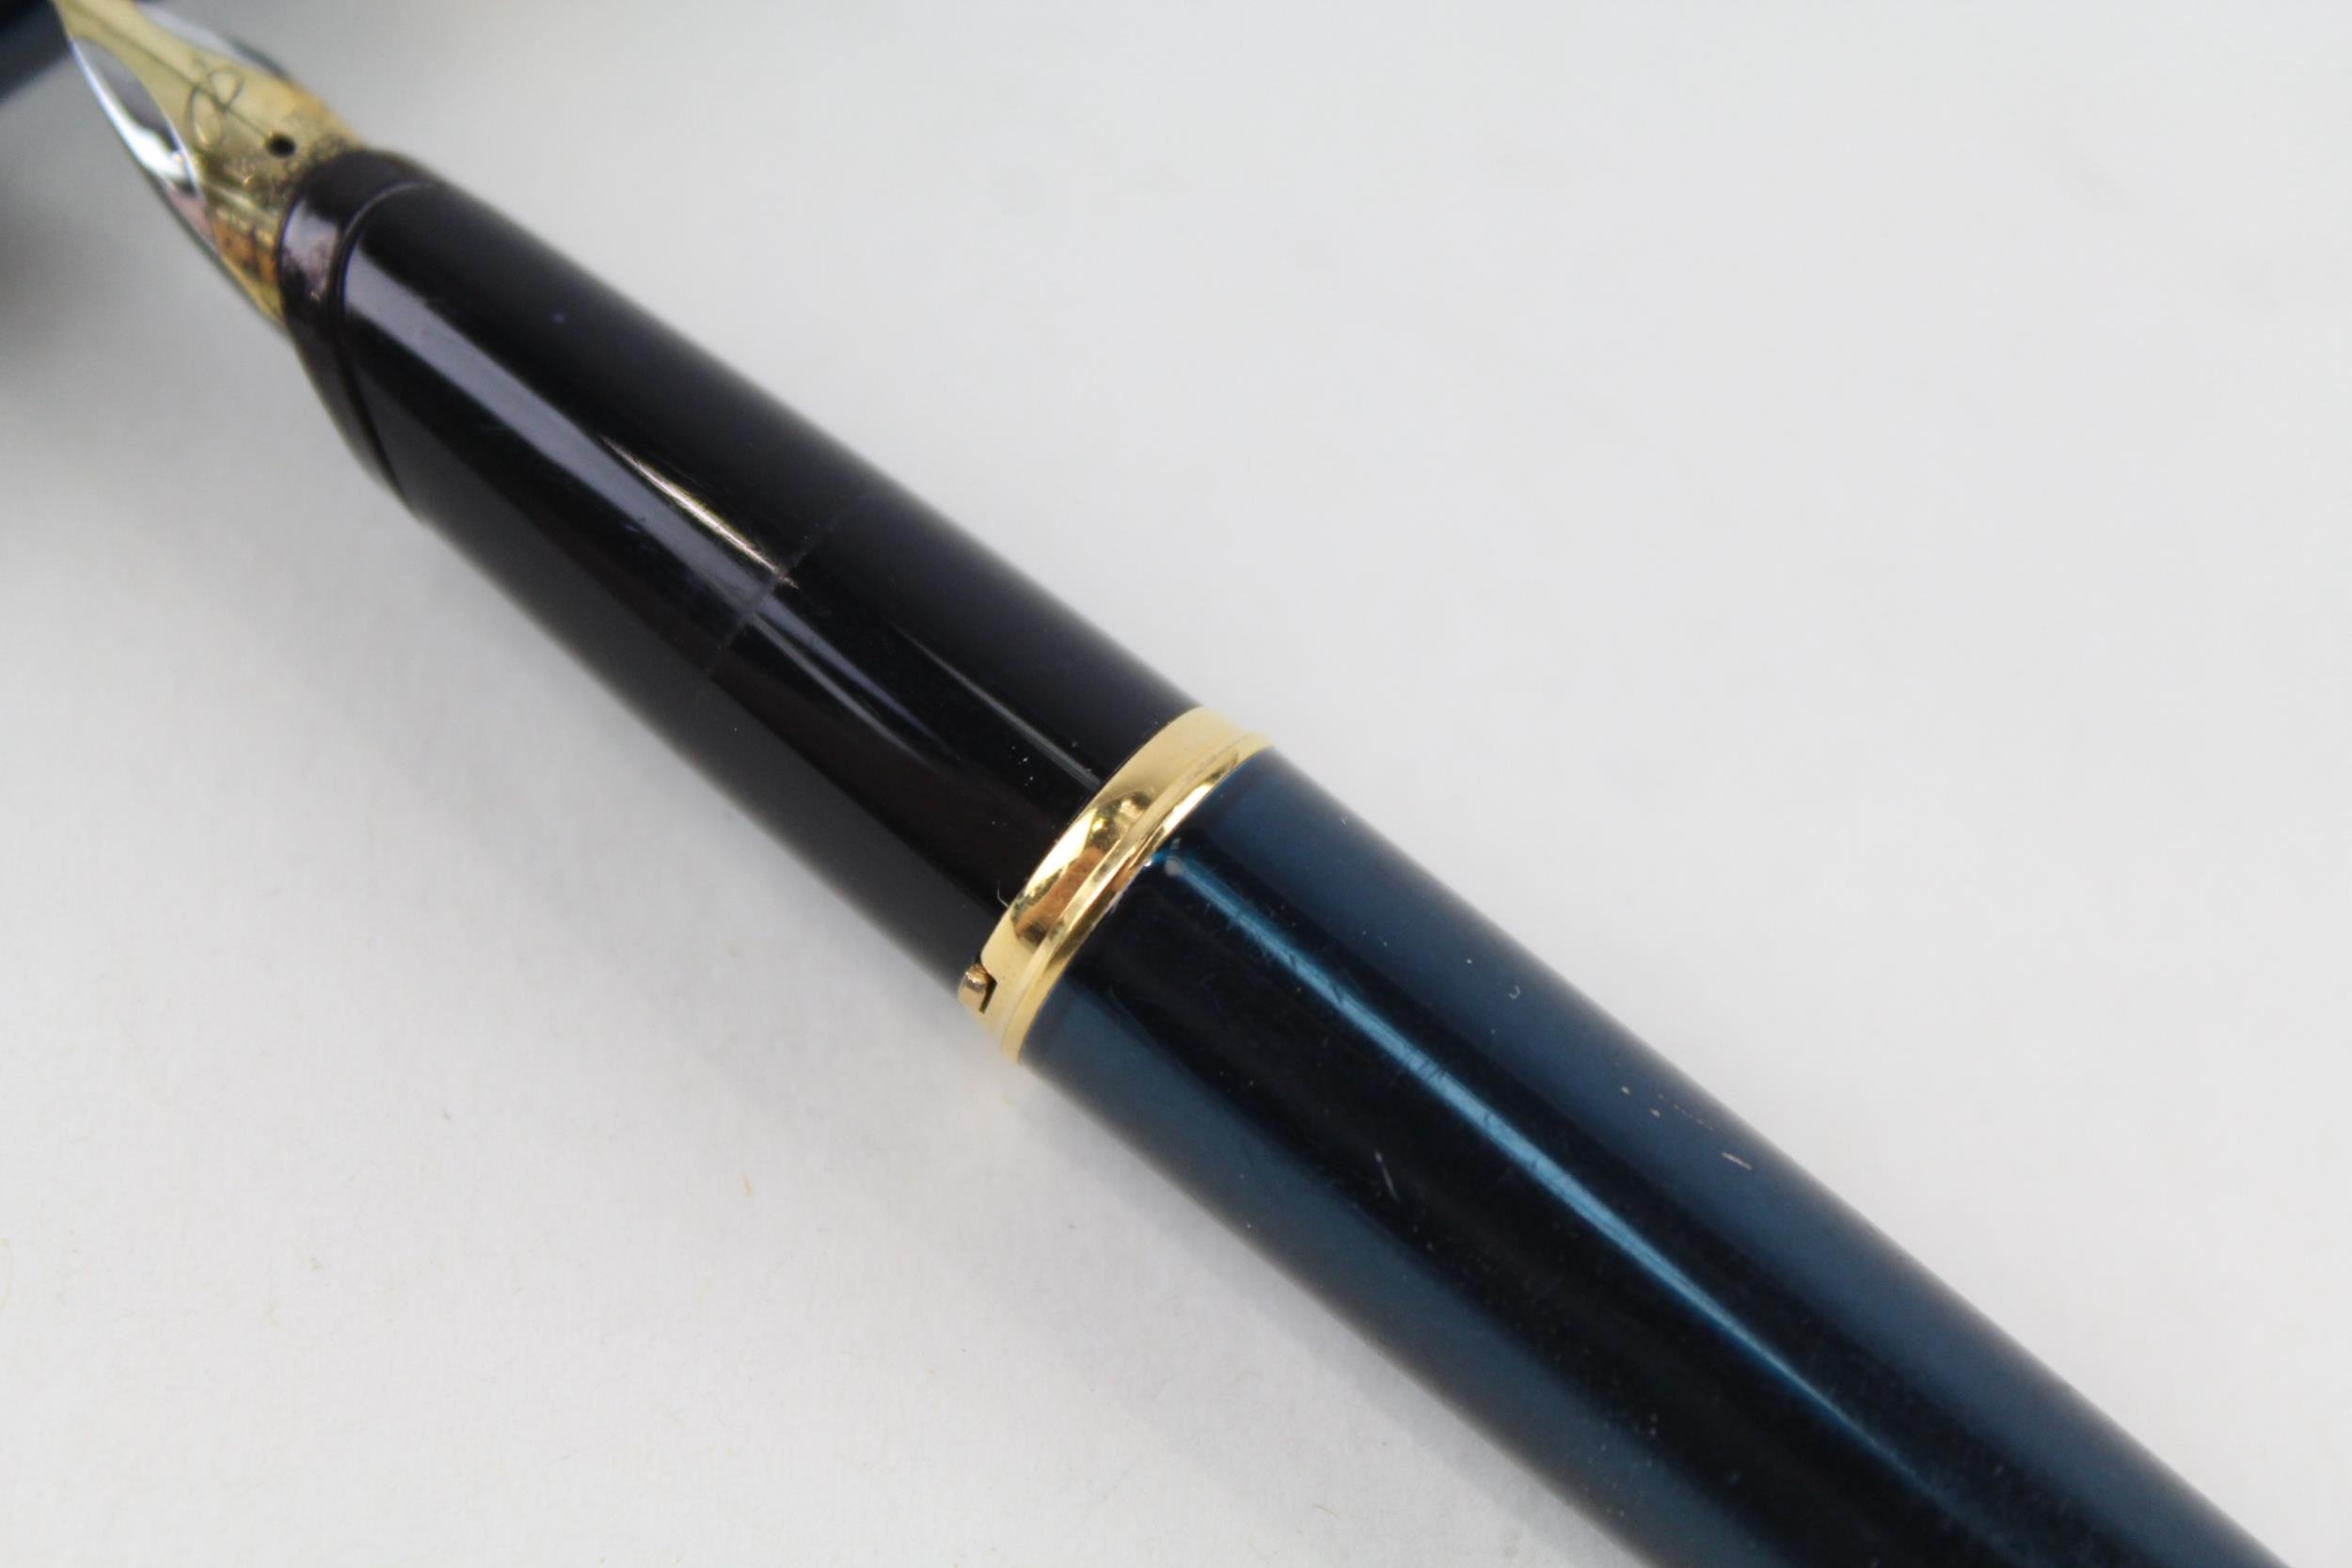 PARKER IM Metallic Teal Fountain Pen w/ 18ct Gold Nib WRITING - Dip Tested & WRITING In previously - Image 5 of 6